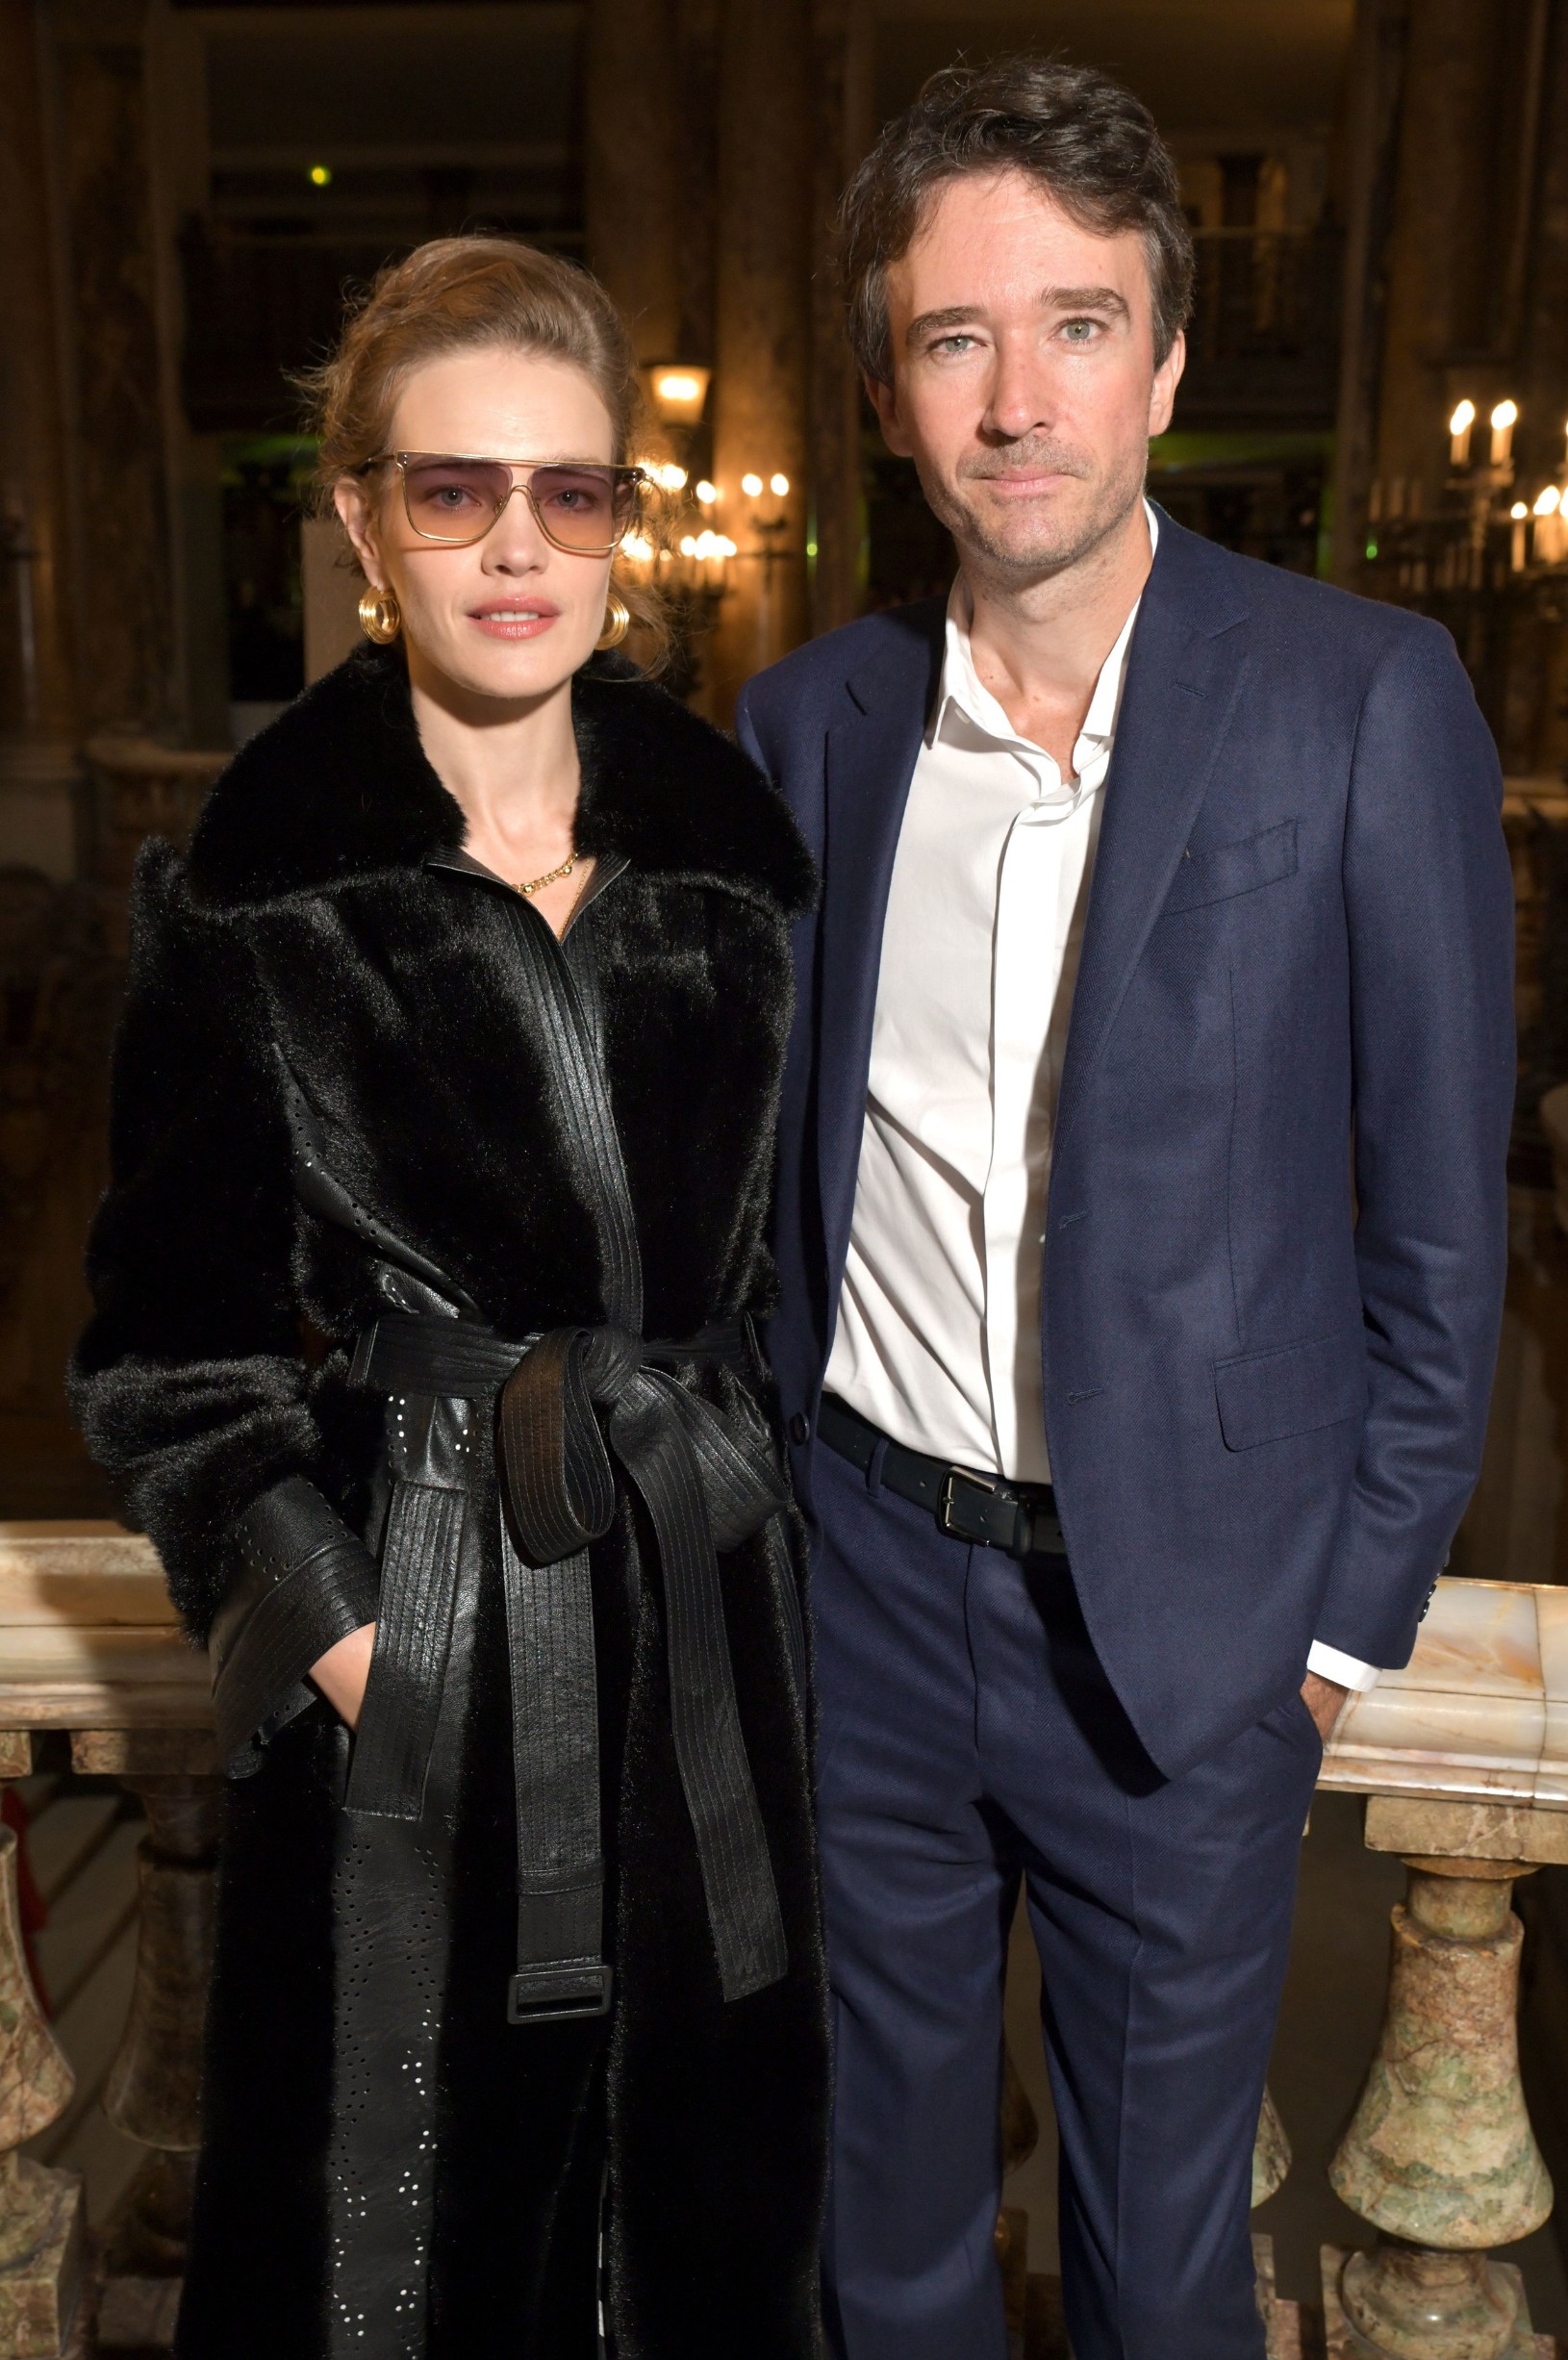 Natalia Vodianova and Antoine Arnault in the front row
Stella McCartney show, Front Row, Spring Summer 2020, Paris Fashion Week, France - 30 Sep 2019, Image: 474260958, License: Rights-managed, Restrictions: , Model Release: no, Credit line: Swan Gallet/WWD / Shutterstock Editorial / Profimedia